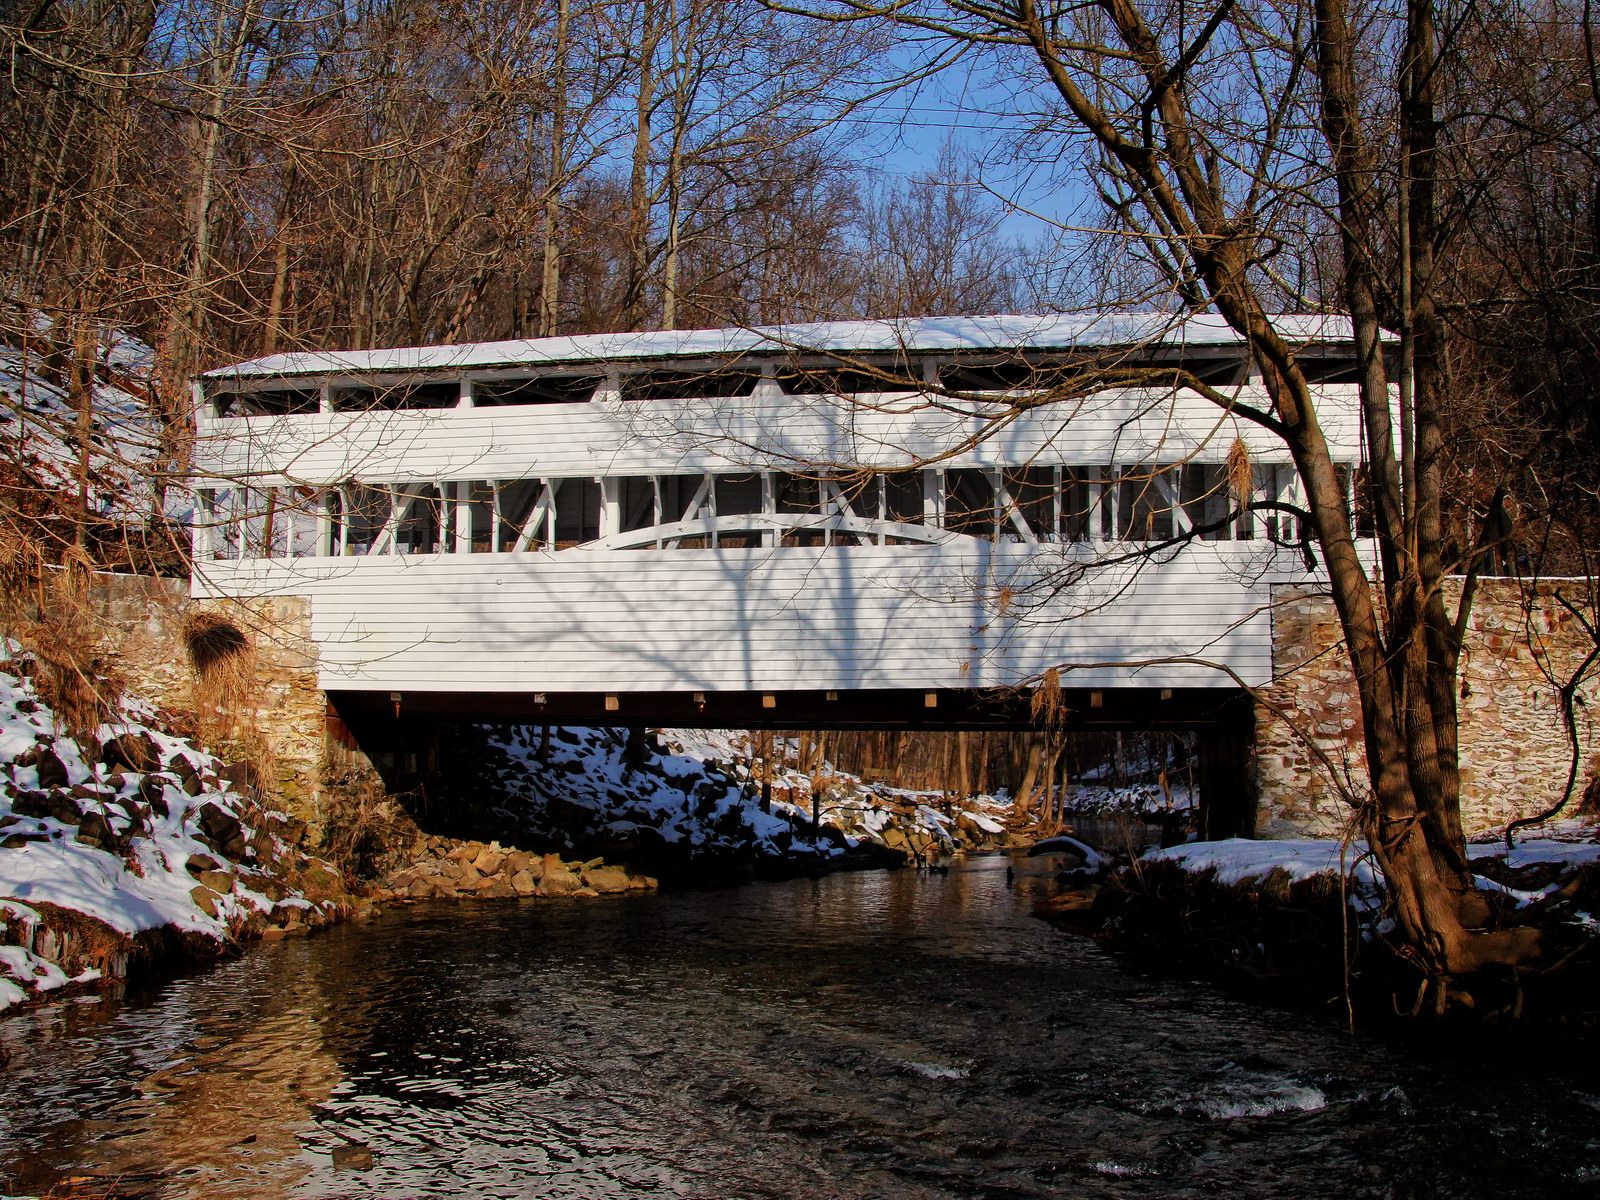 The Knox bridge 1865 is located within the Valley Forge National Historical Park. The bridge is one of the most distinctive bridges...